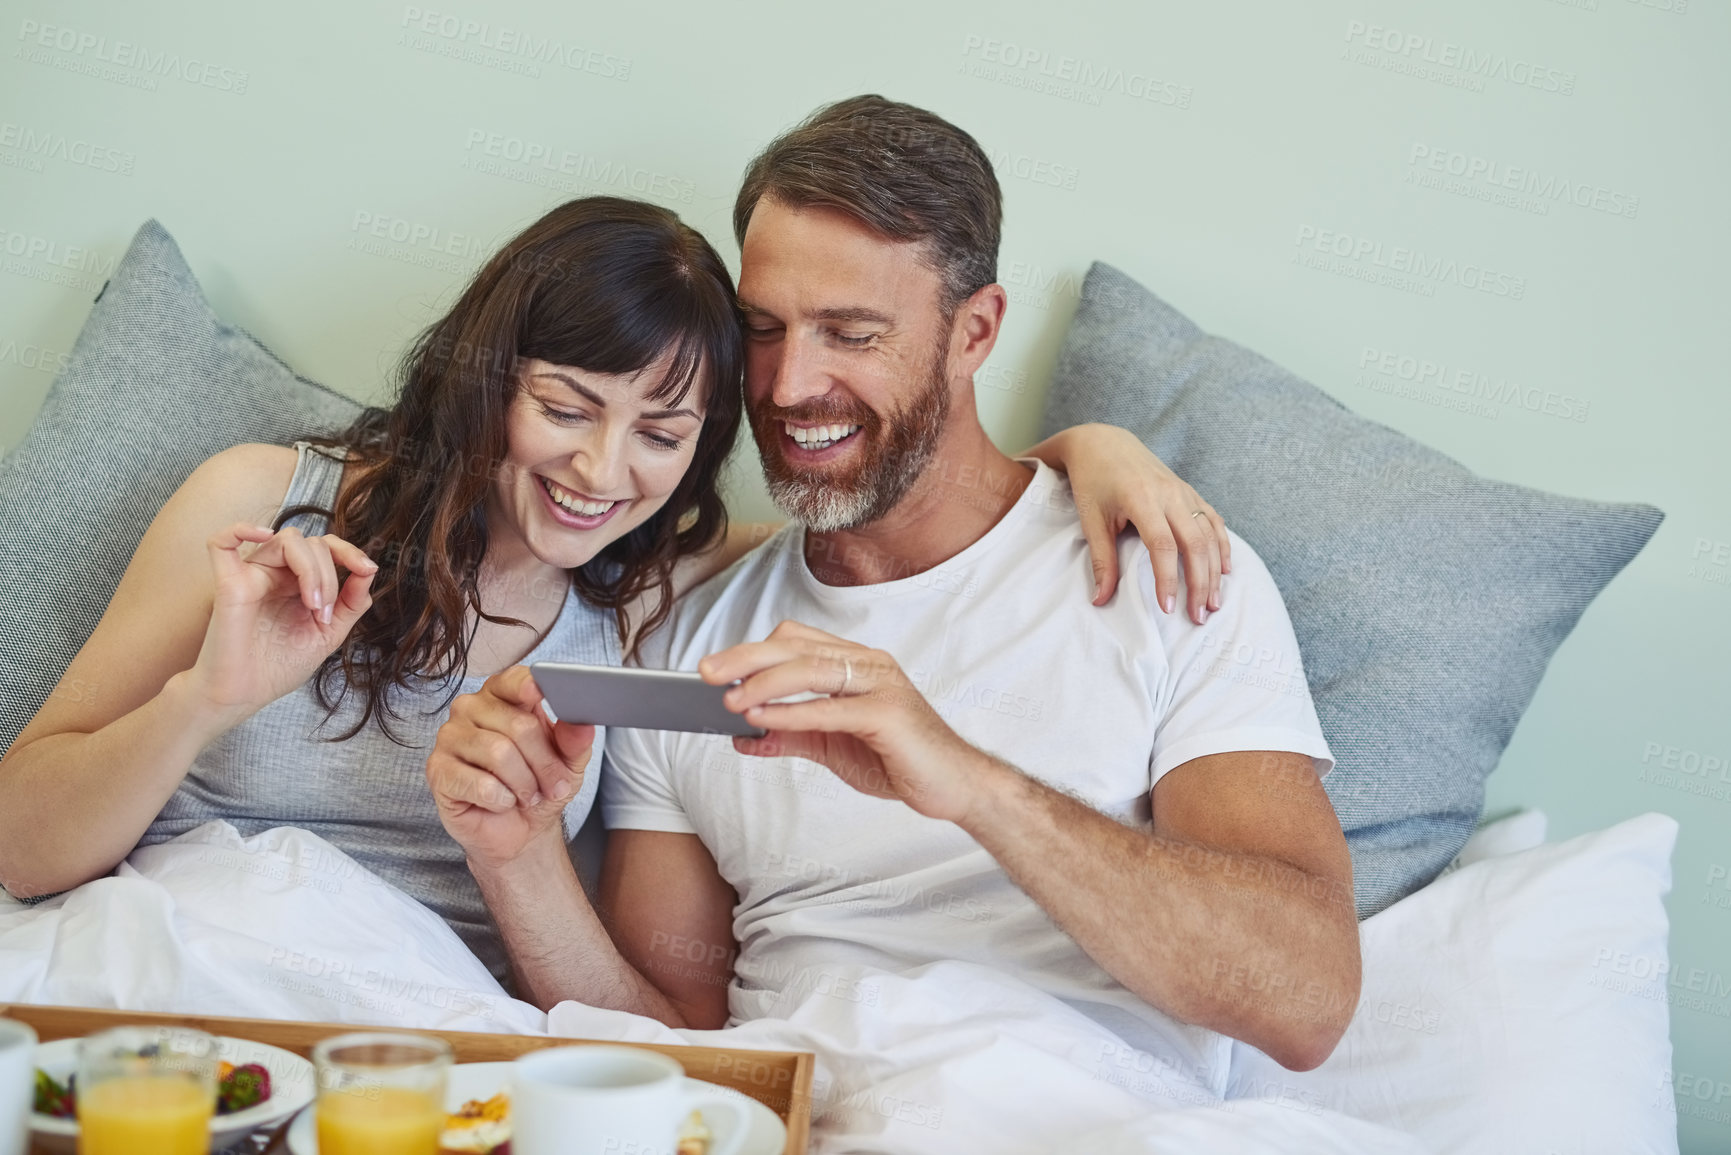 Buy stock photo Shot of a cheerful young couple sitting in bed while enjoying breakfast together and taking a picture during morning hours